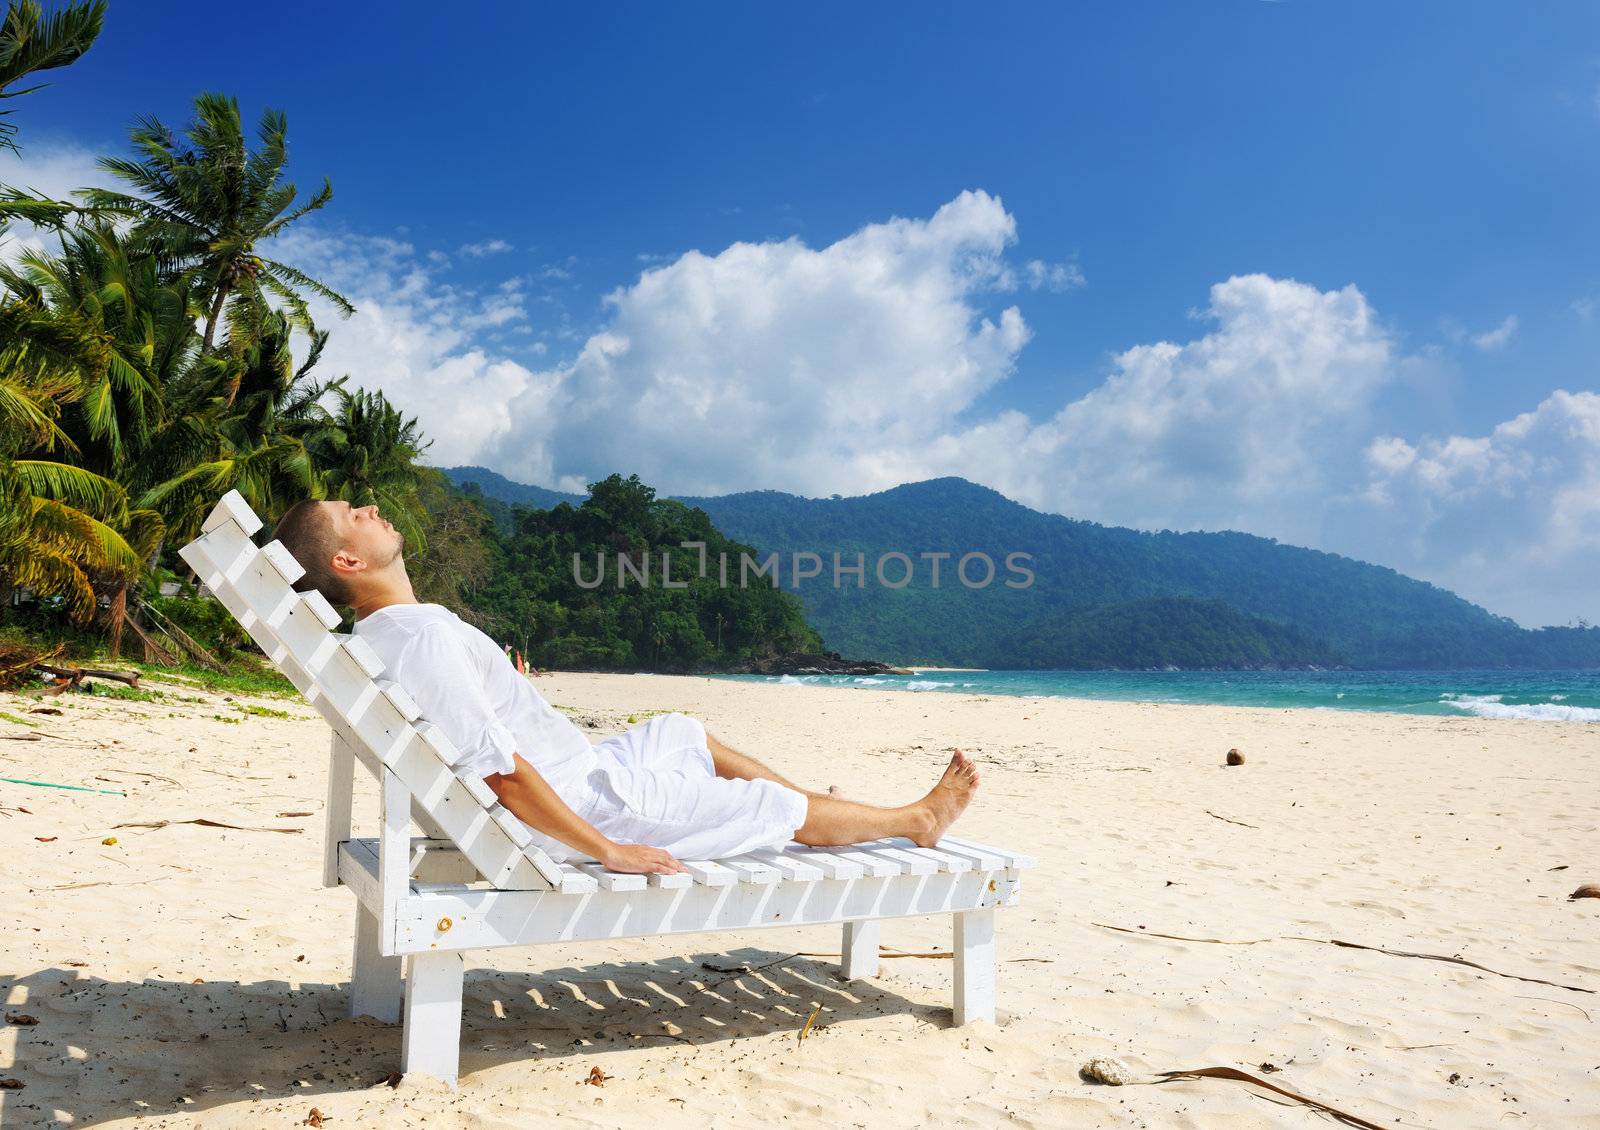 Man relaxing on a beach by haveseen